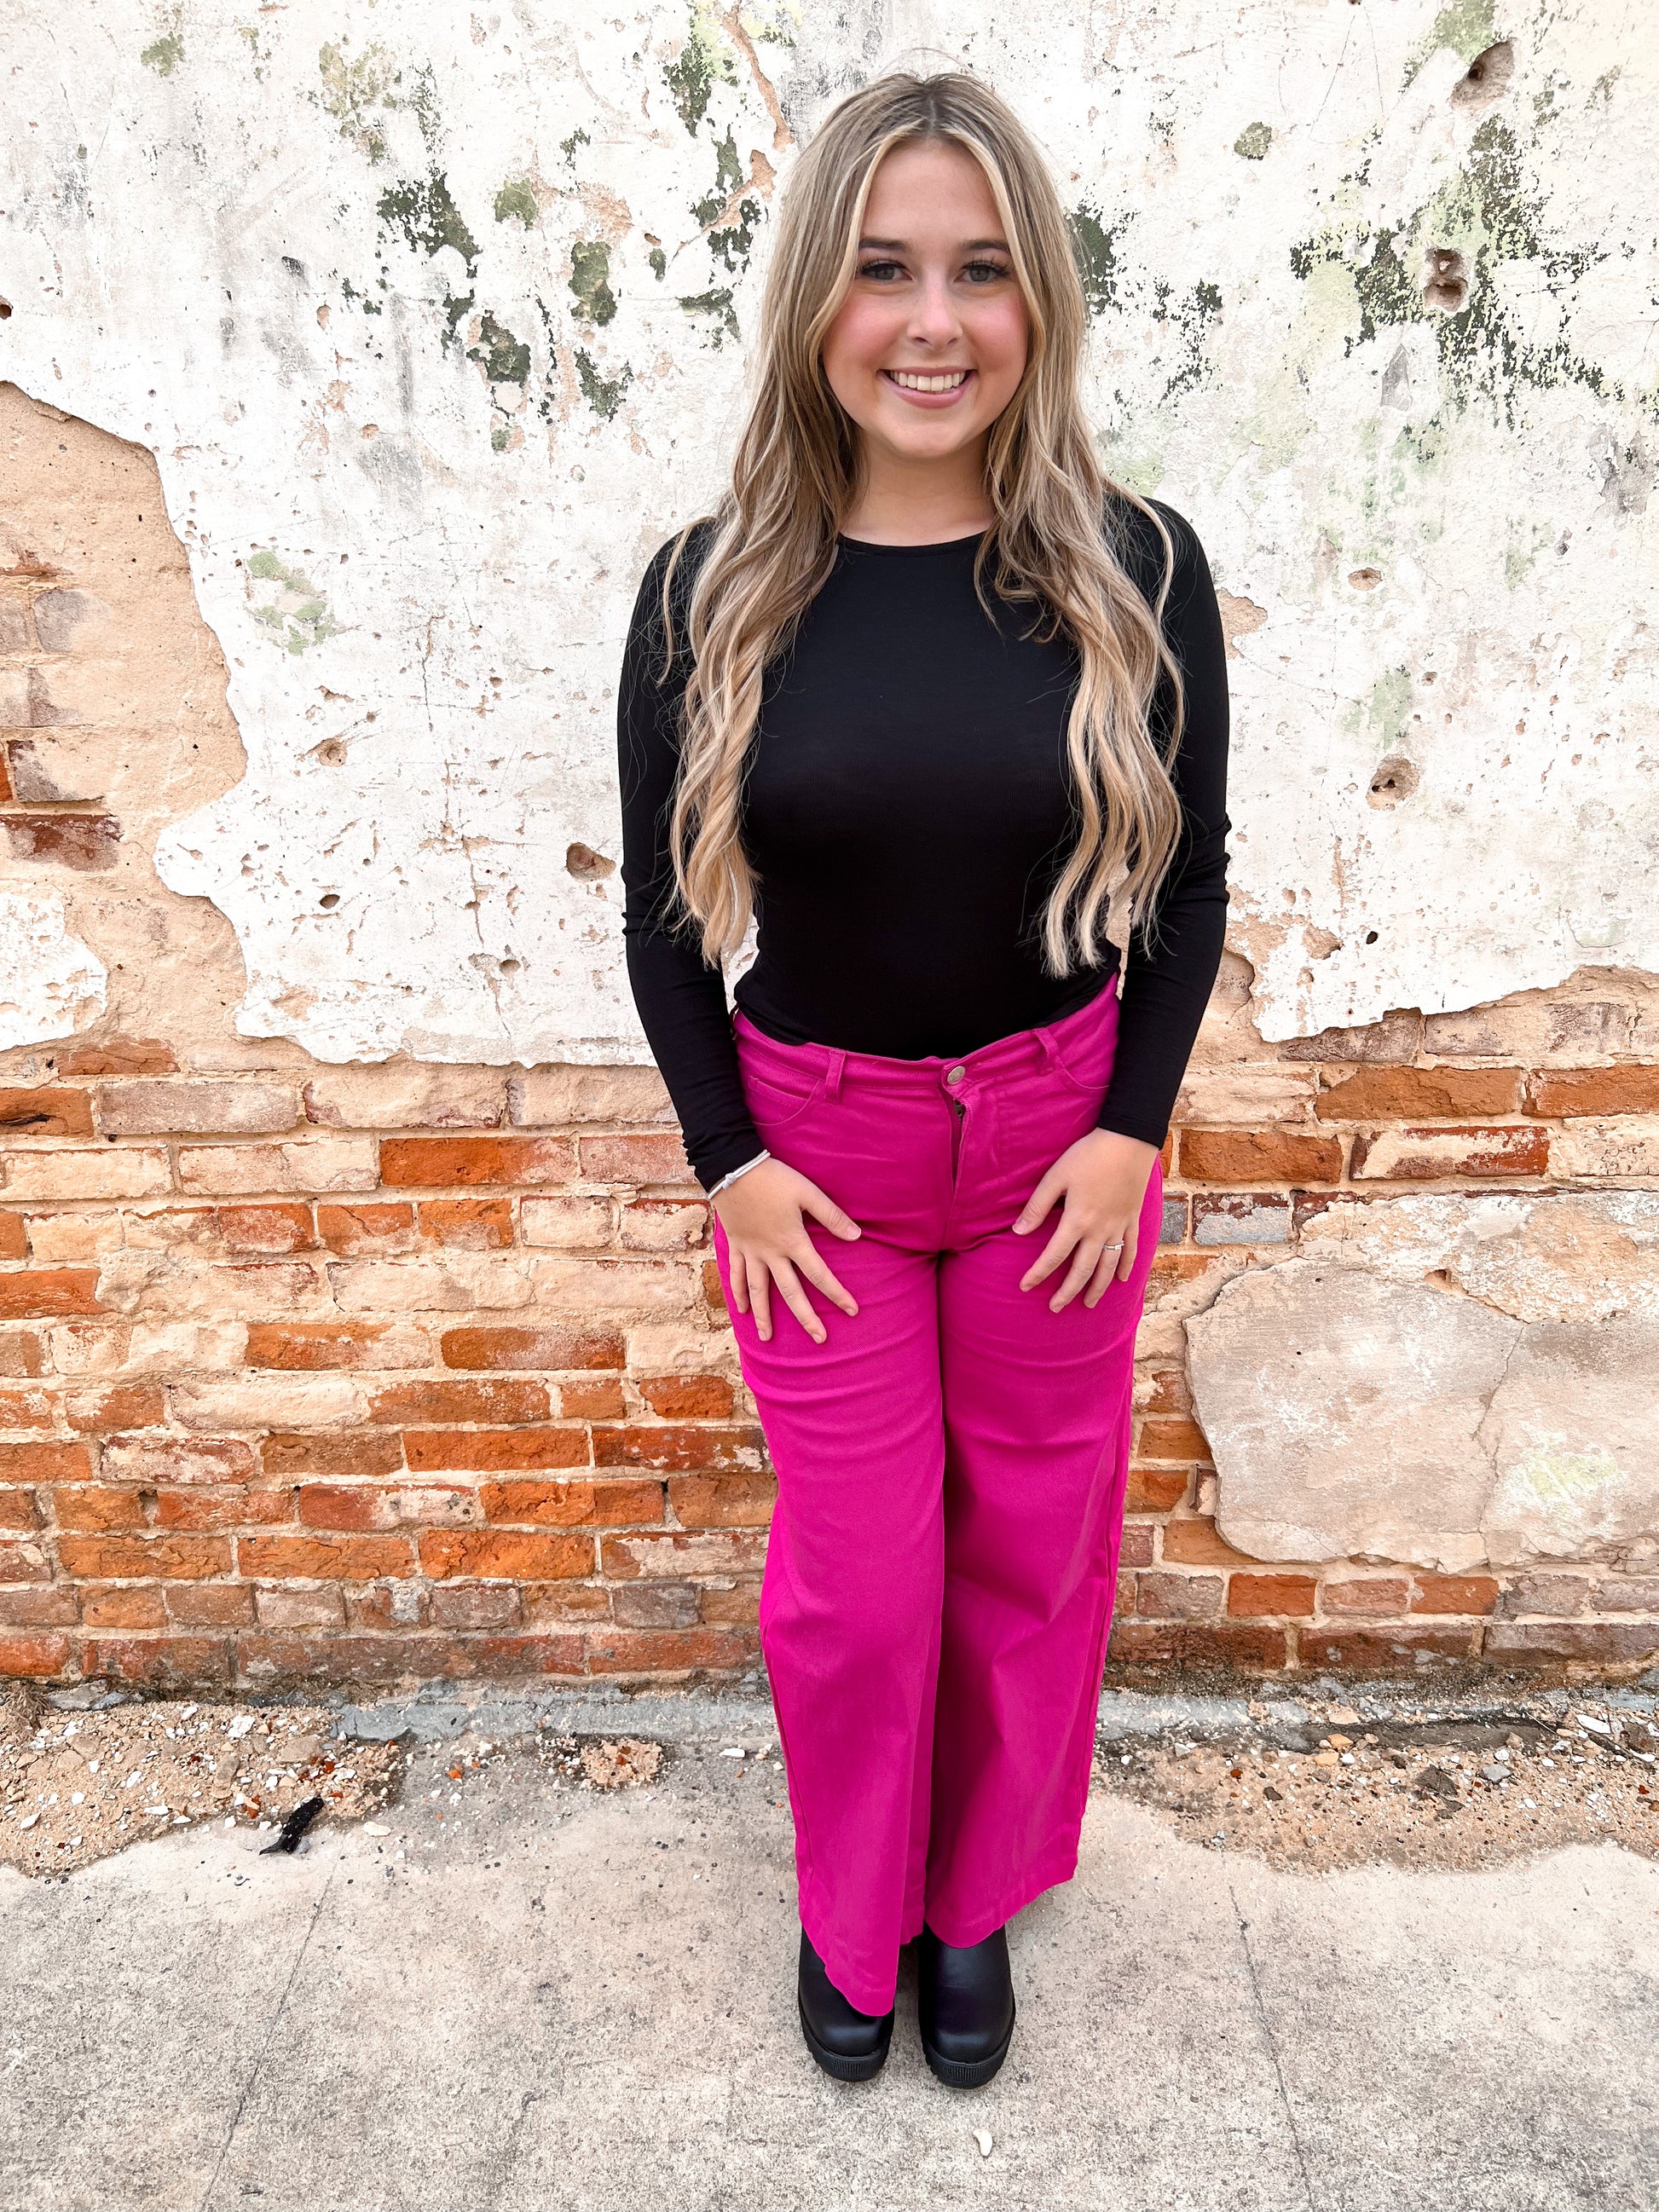 Alyssa Solid Magenta High Waisted Wide Leg Pants-Pants-Entro-8/8/23, BIN A5-The Twisted Chandelier